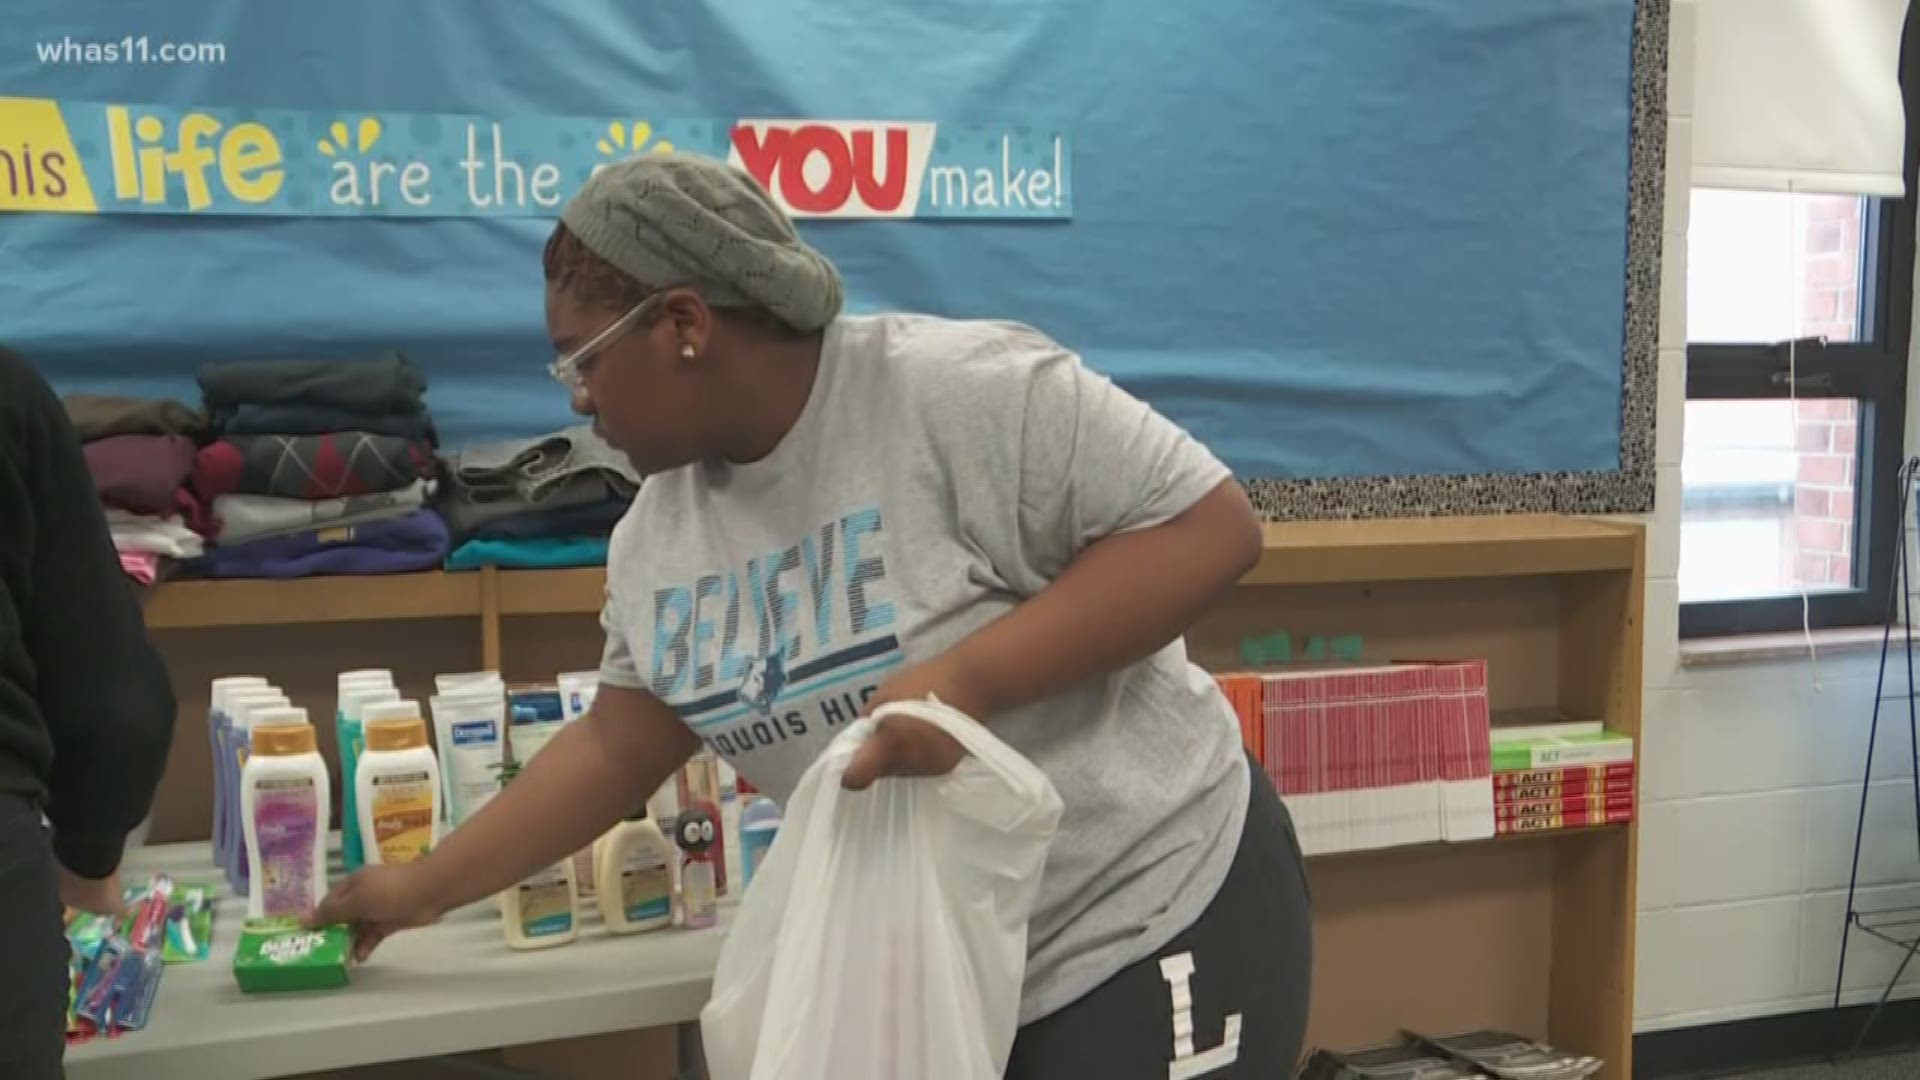 Classrooms at Iroquois High School are collecting donations for Louisville's homeless, a problem close to several people at the school.